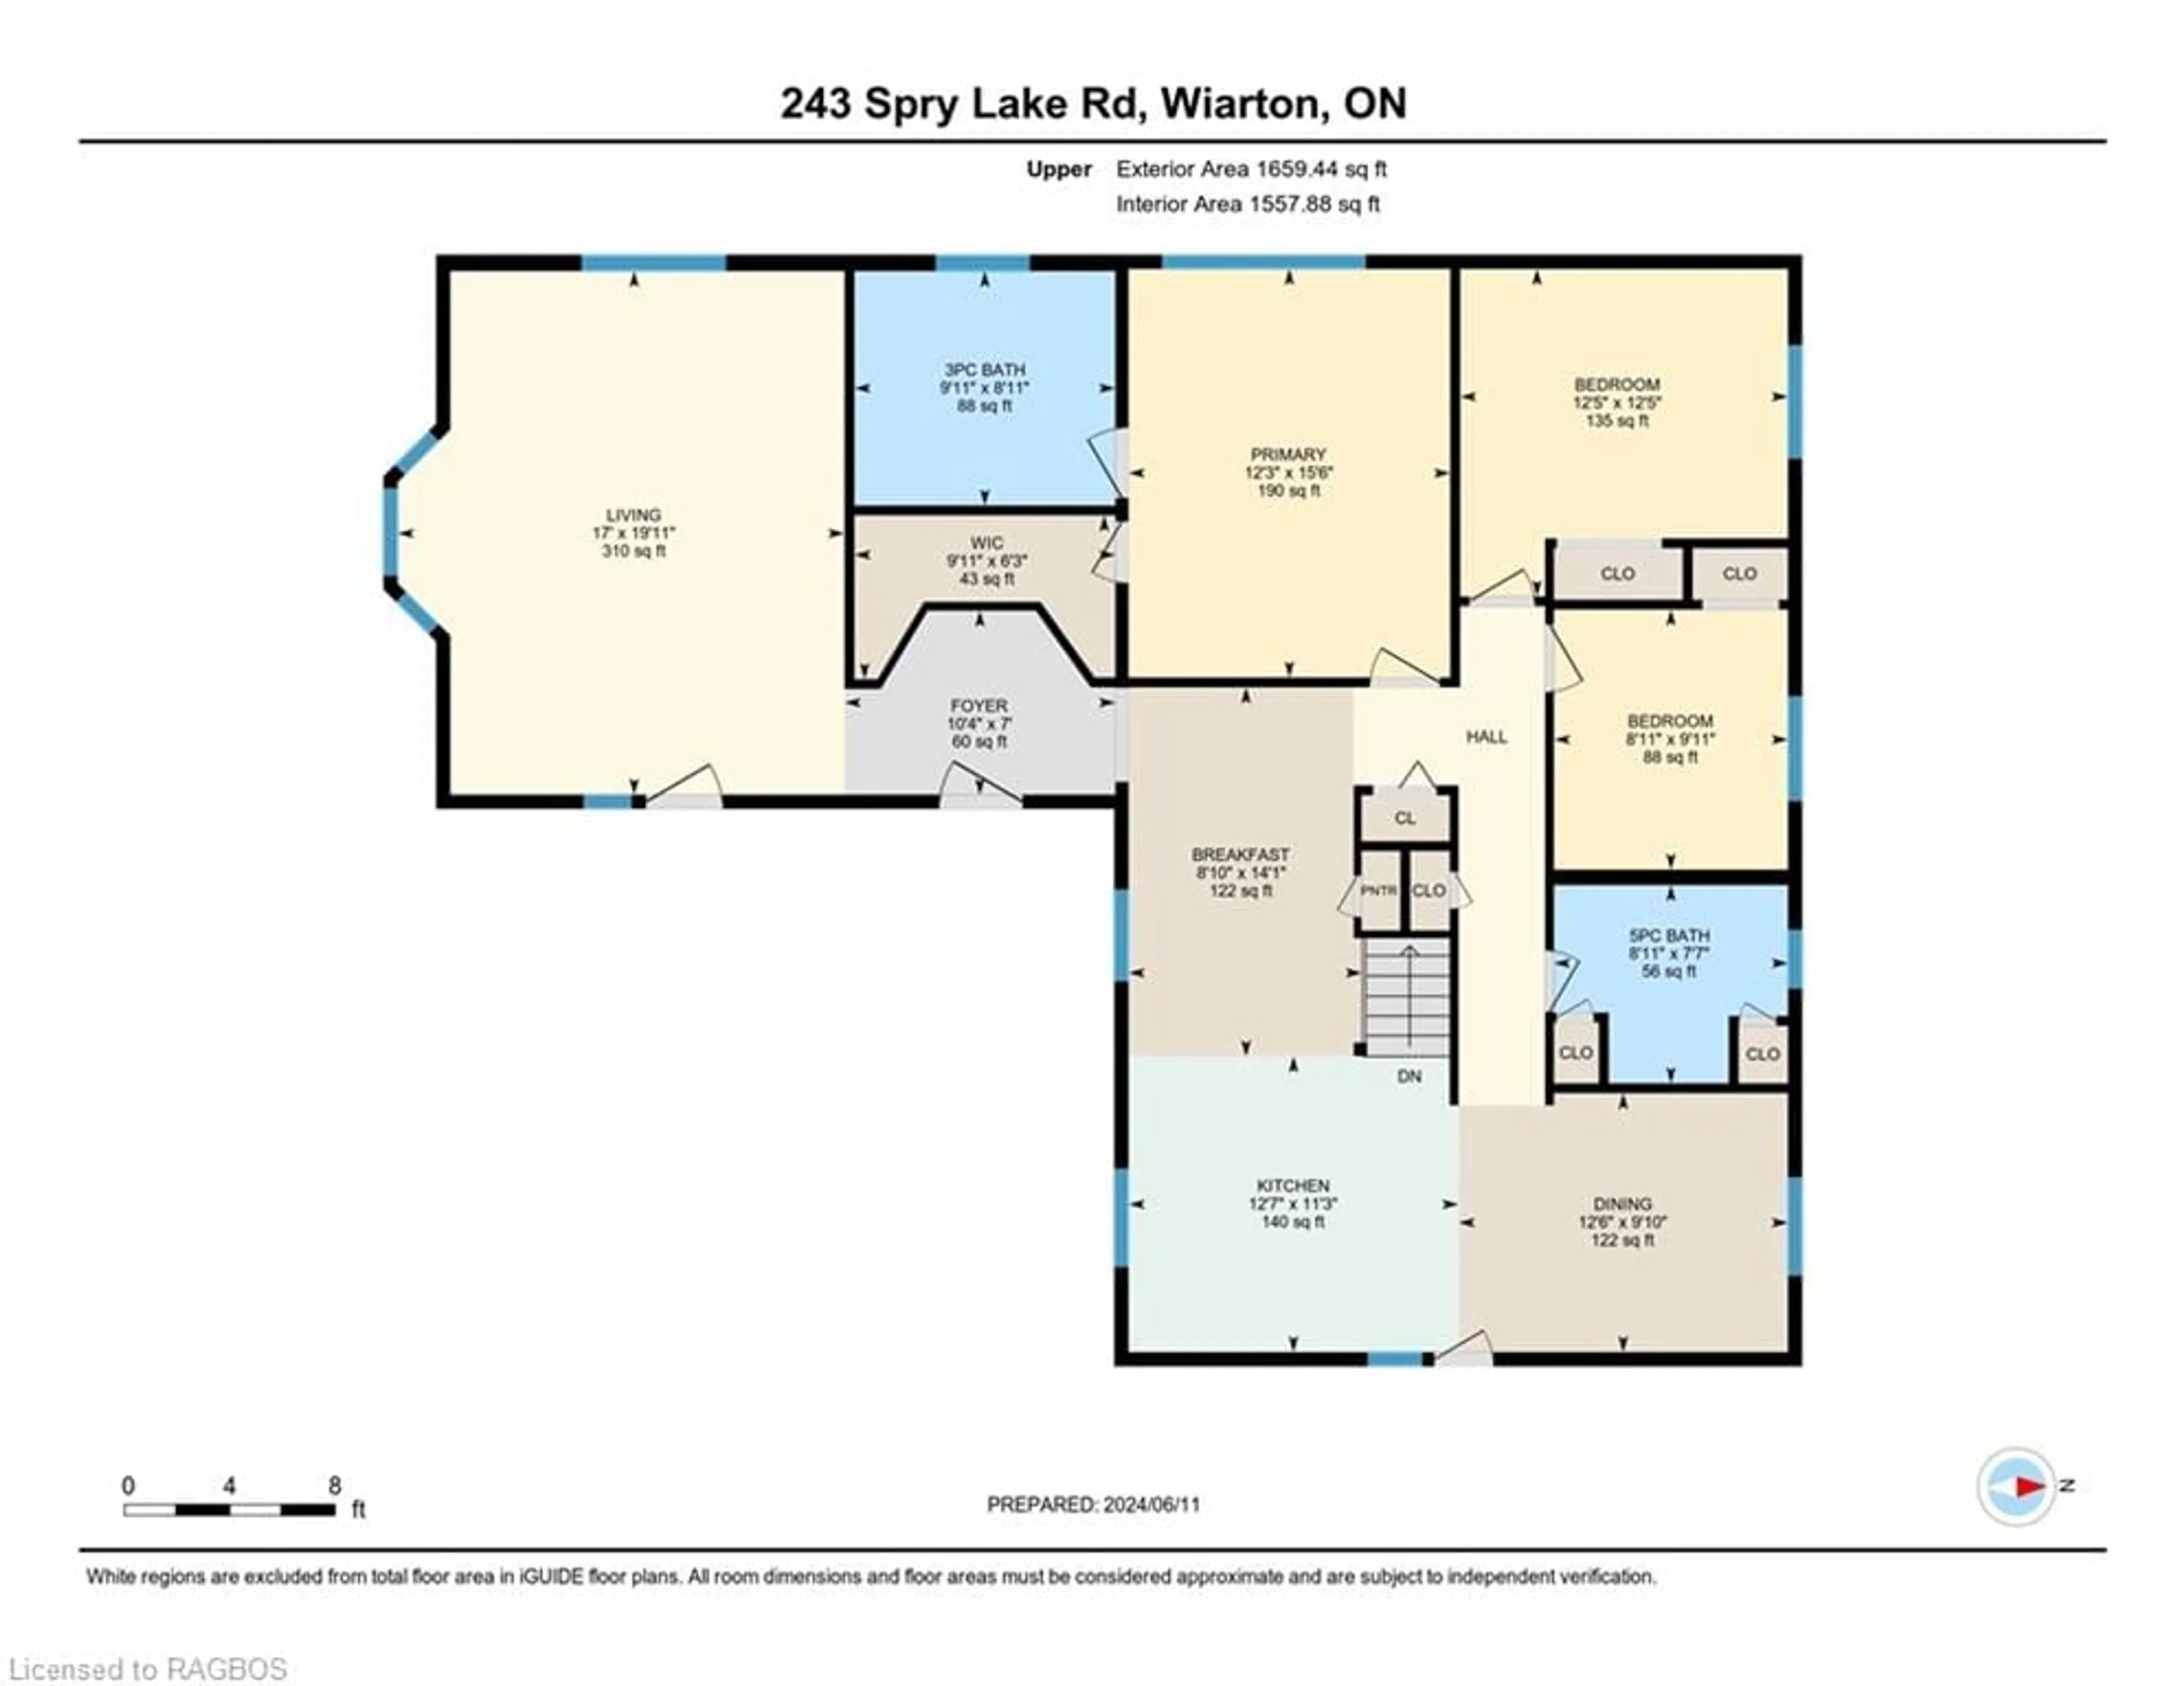 Floor plan for 243 Spry Lake Rd, Oliphant Ontario N0H 2T0